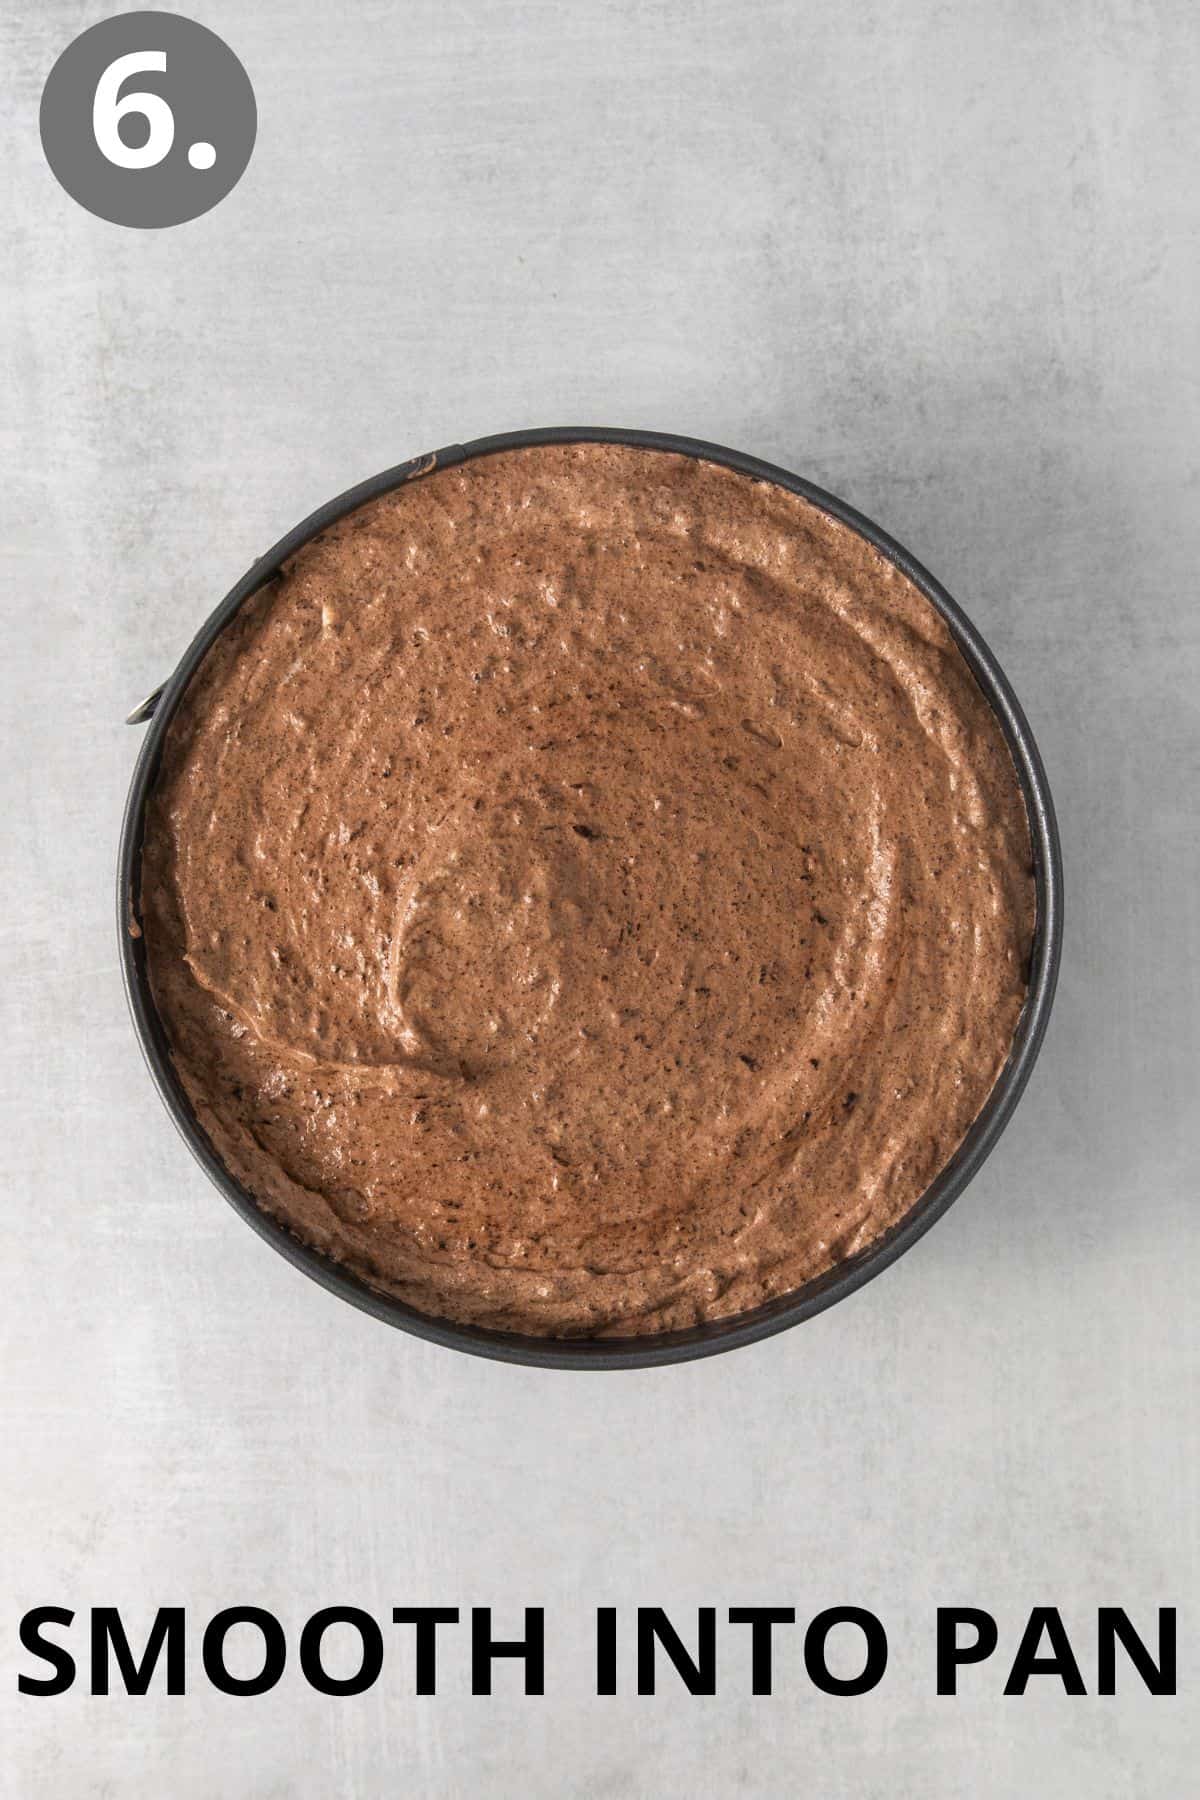 Flourless chocolate torte batter in a round cake pan